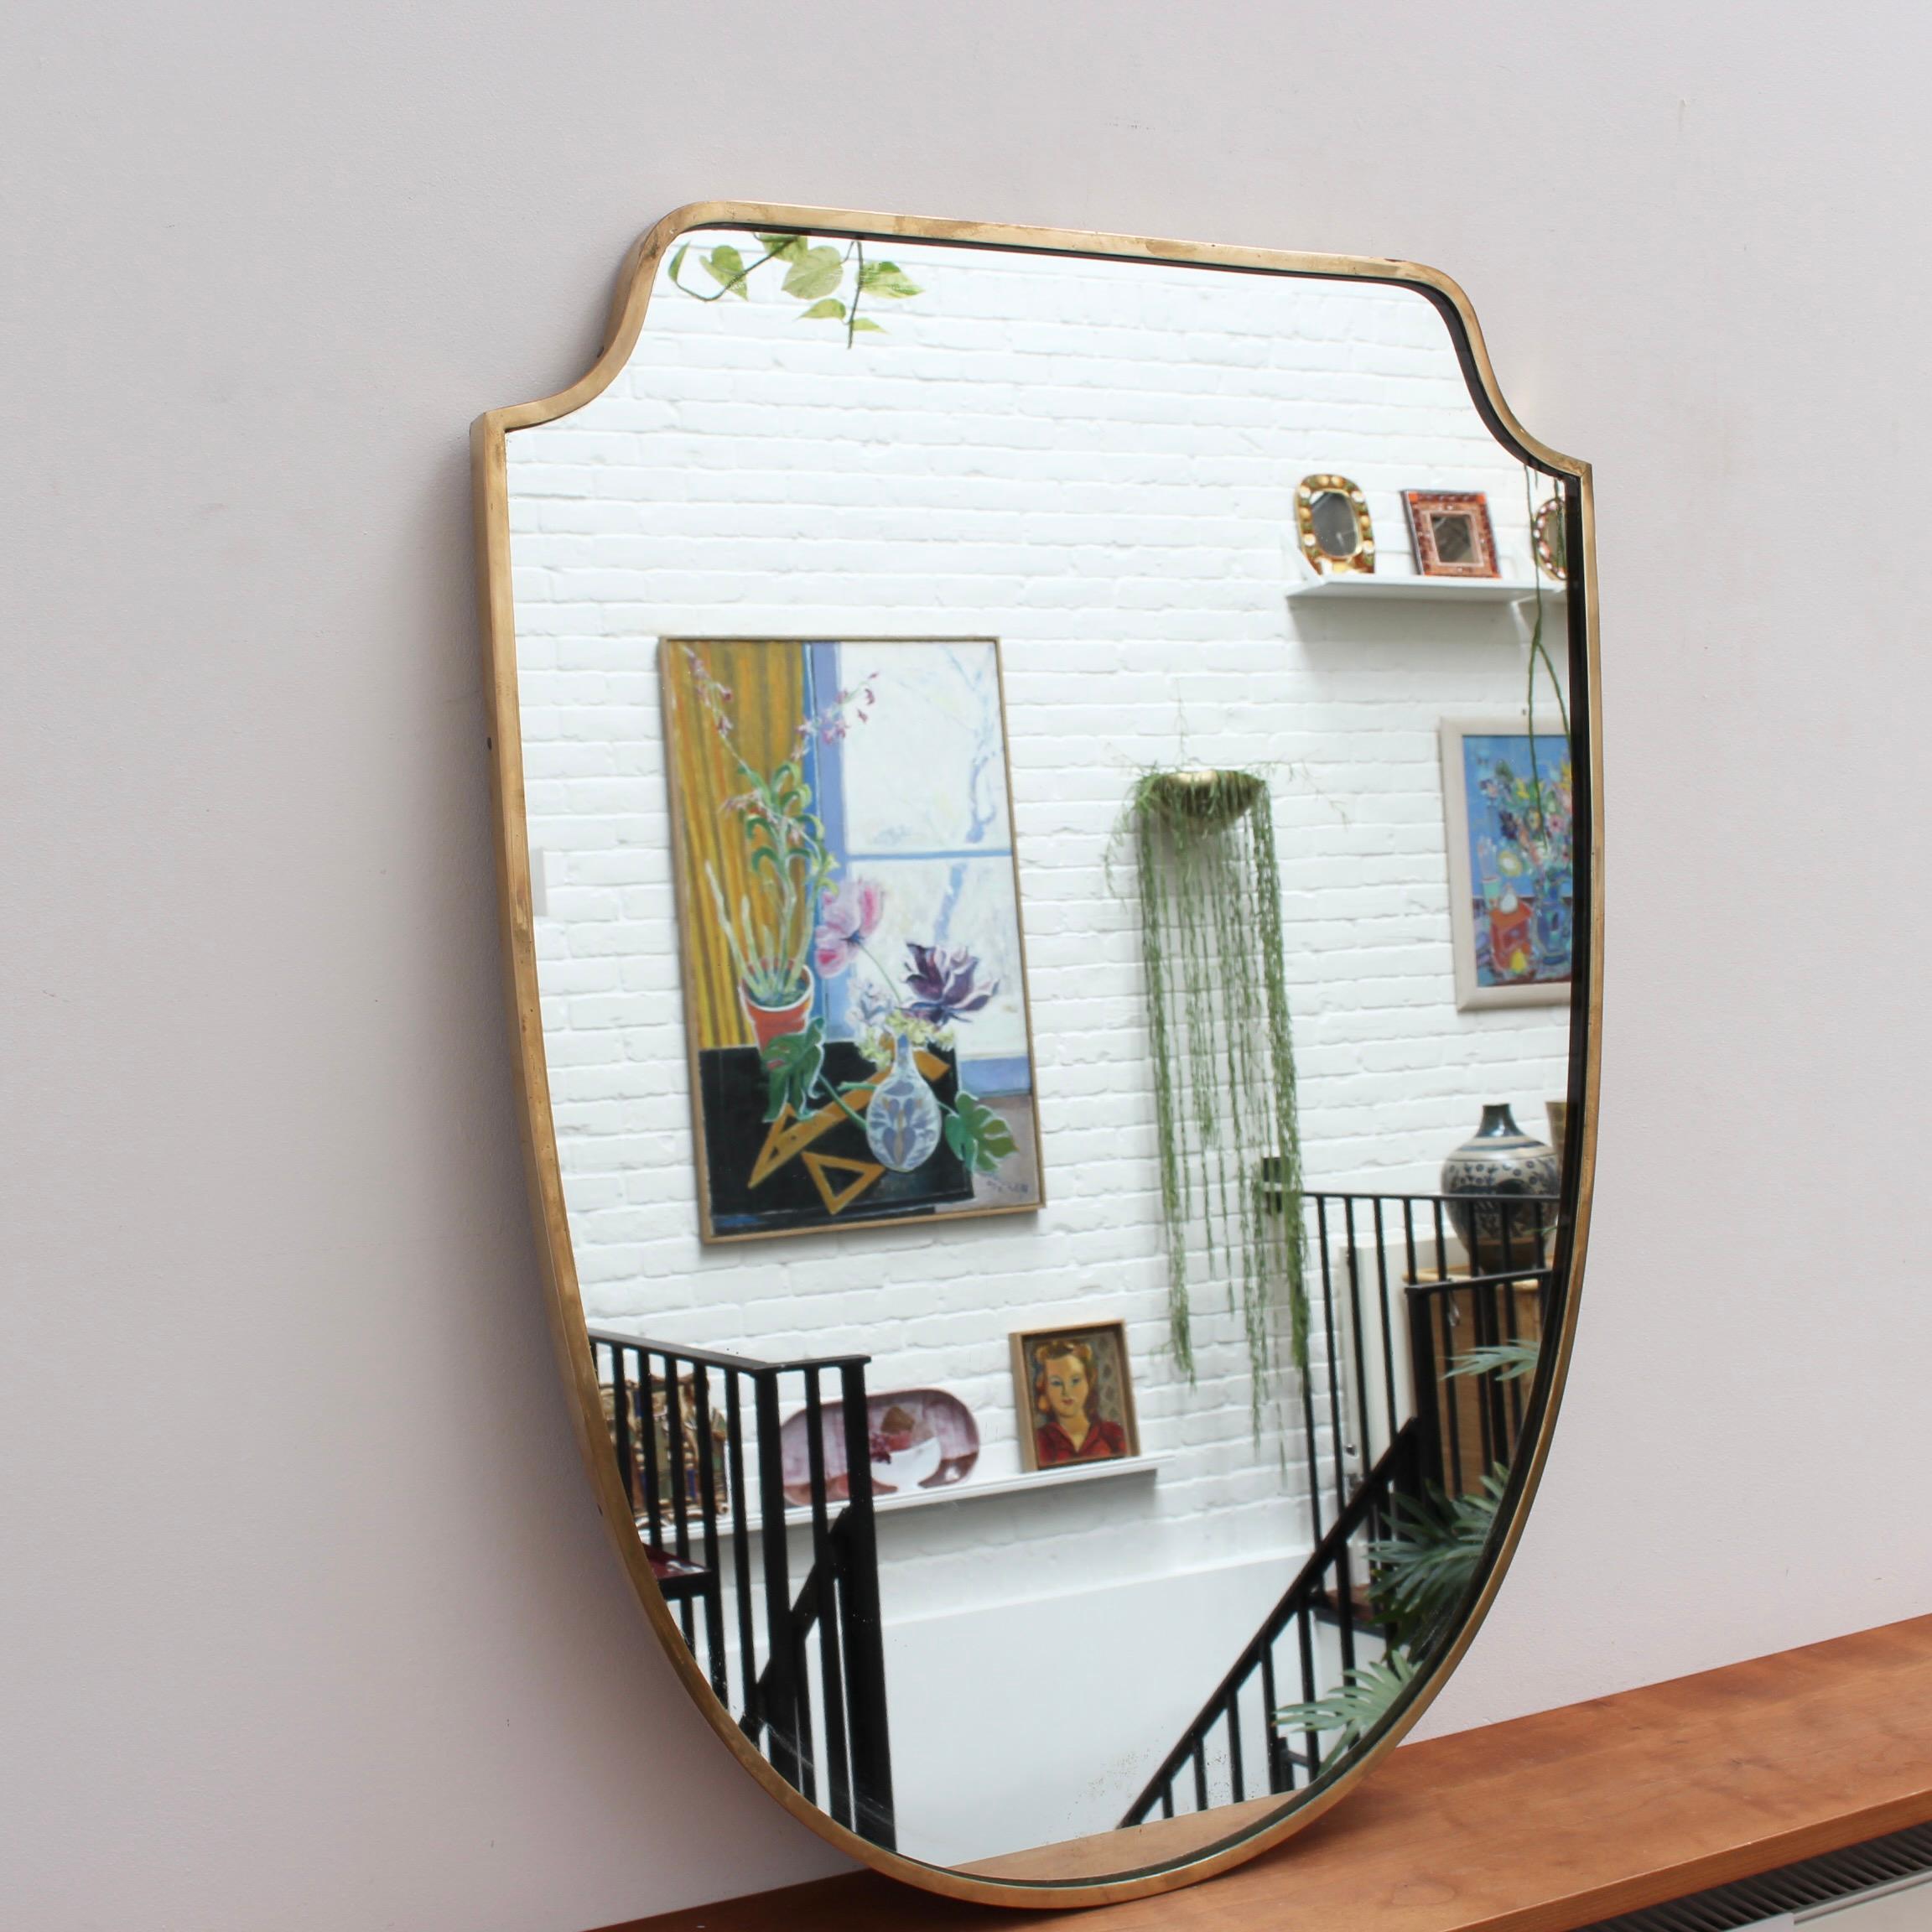 Mid-century Italian wall mirror with brass frame (circa 1950s). This mirror is simply elegant and characterful in a modern Gio Ponti style. It is crest-shaped and in good overall condition. There are some minor blemishes present on the lower portion